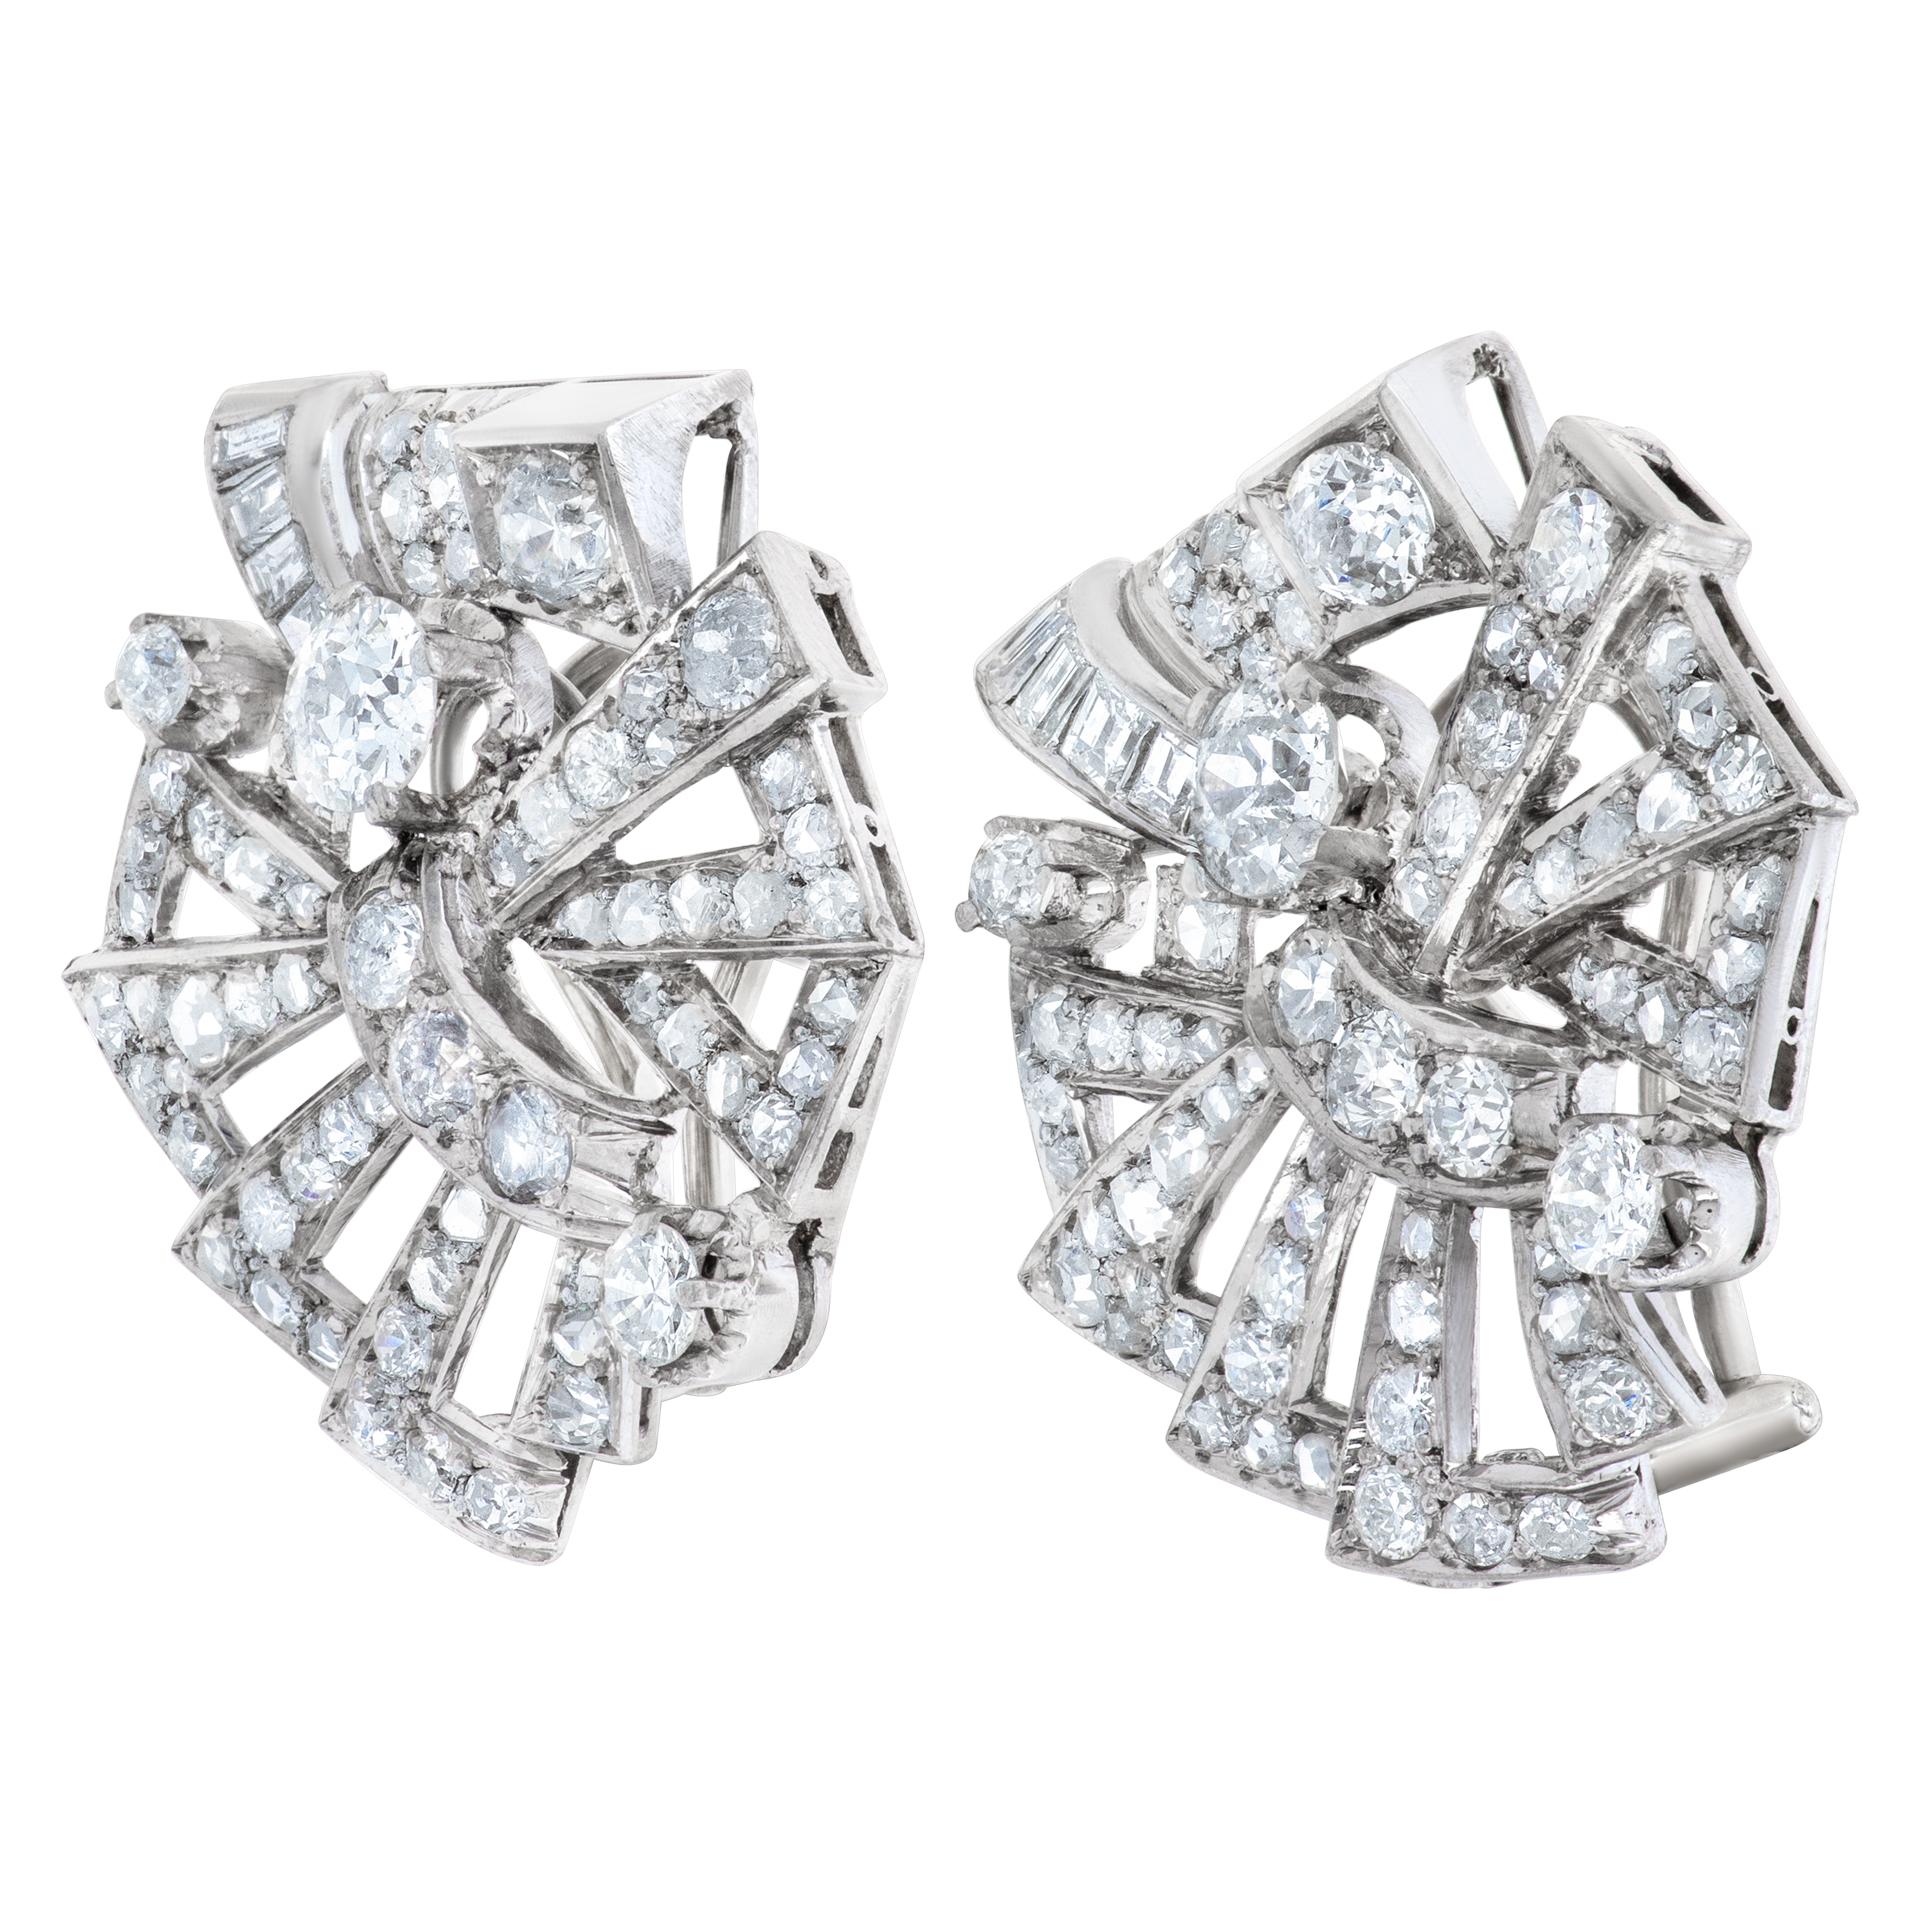 Art Deco Style pair of earrings with over 5 carats rose cut, European & baguette diamonds set in 18k white gold. Post Omega clip for added security. All diamonds are white and eye clean. Hanging length 1.10 inches. Width 29mm.
